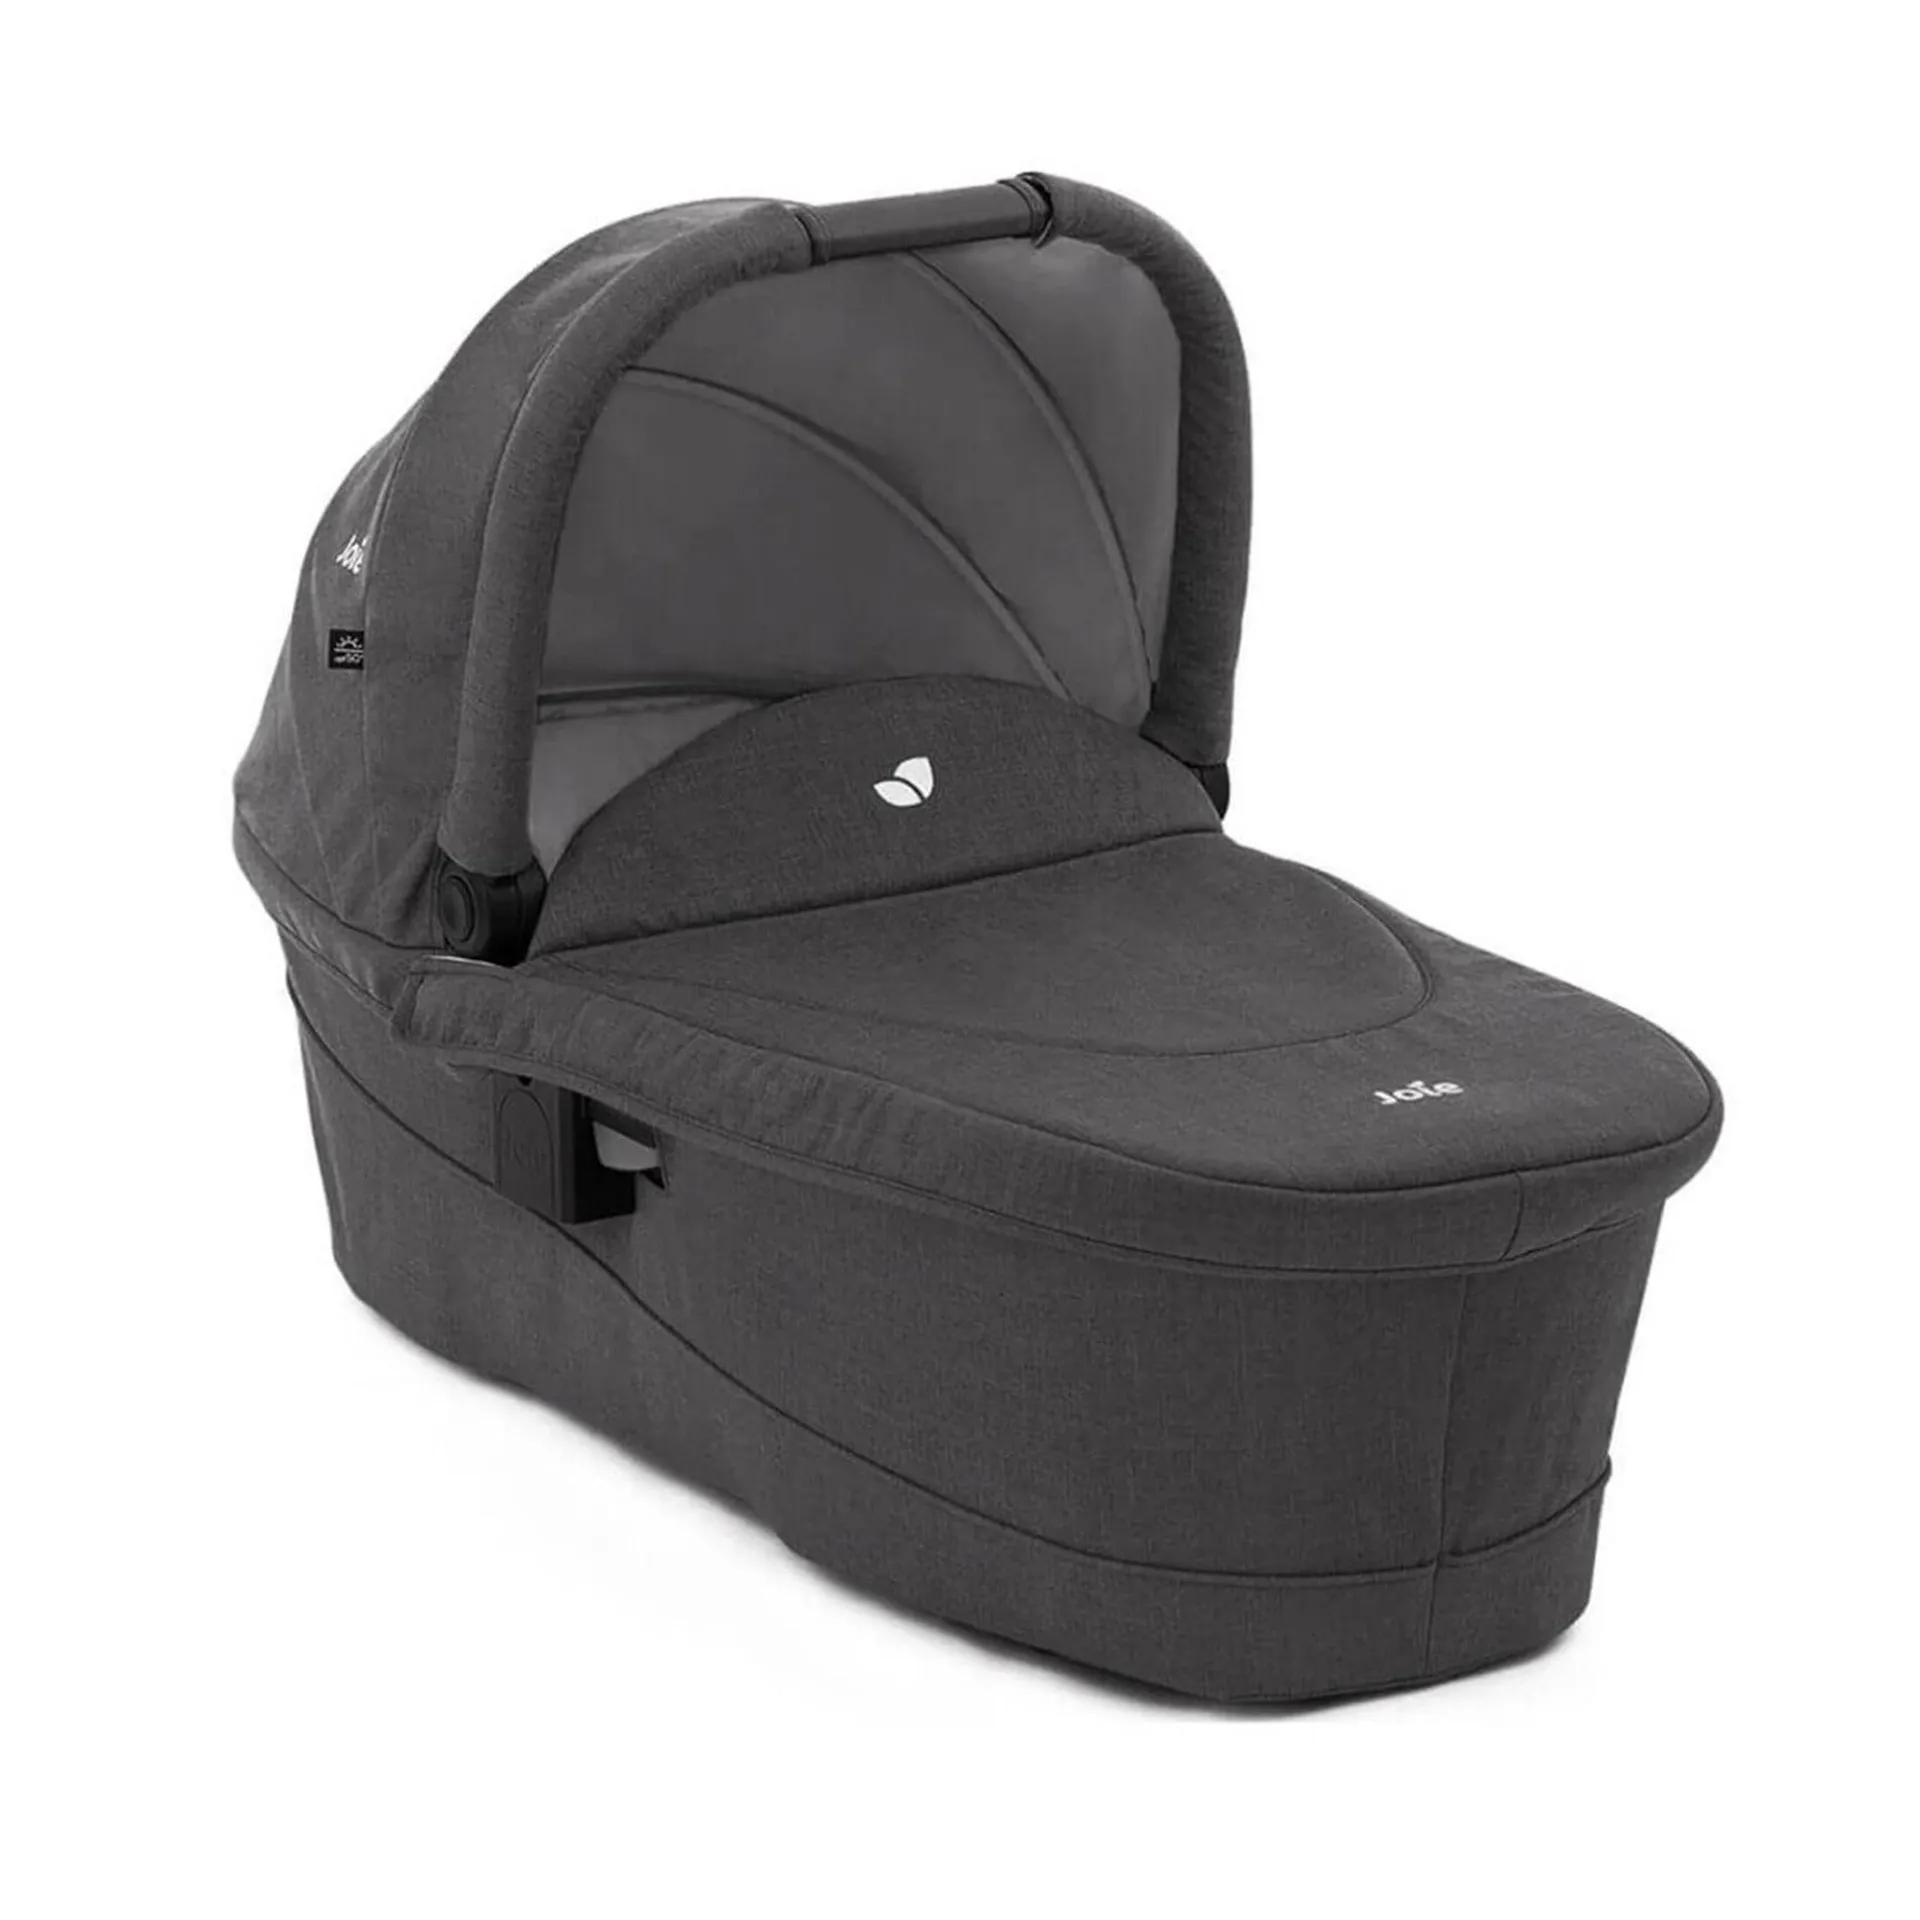 Joie Ramble XL Carrycot in Shale